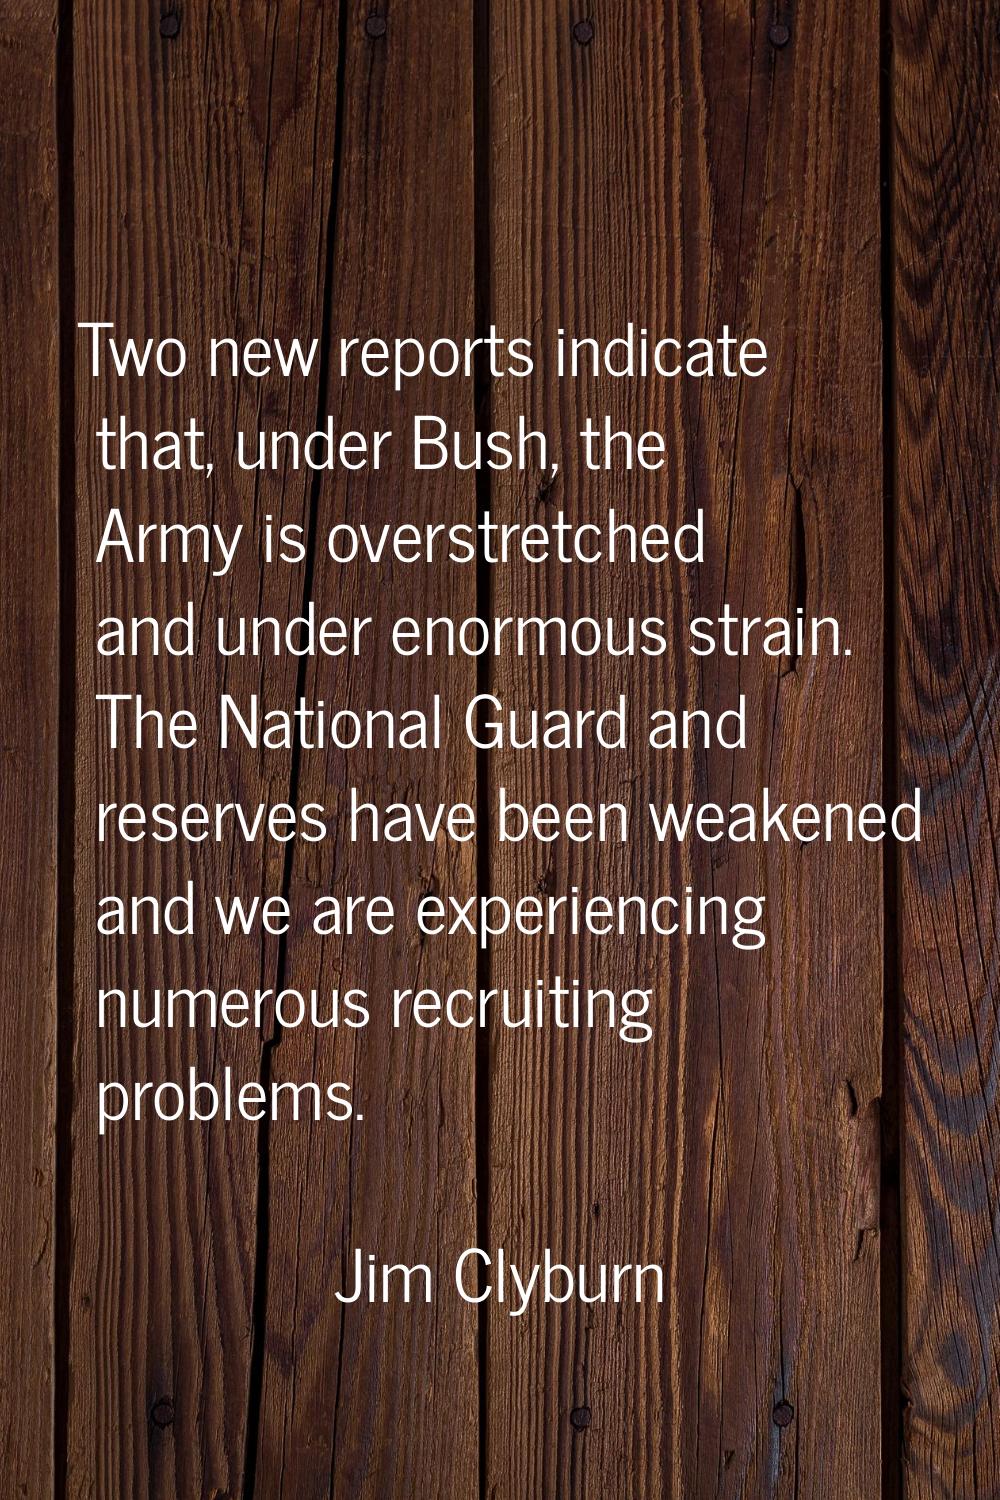 Two new reports indicate that, under Bush, the Army is overstretched and under enormous strain. The